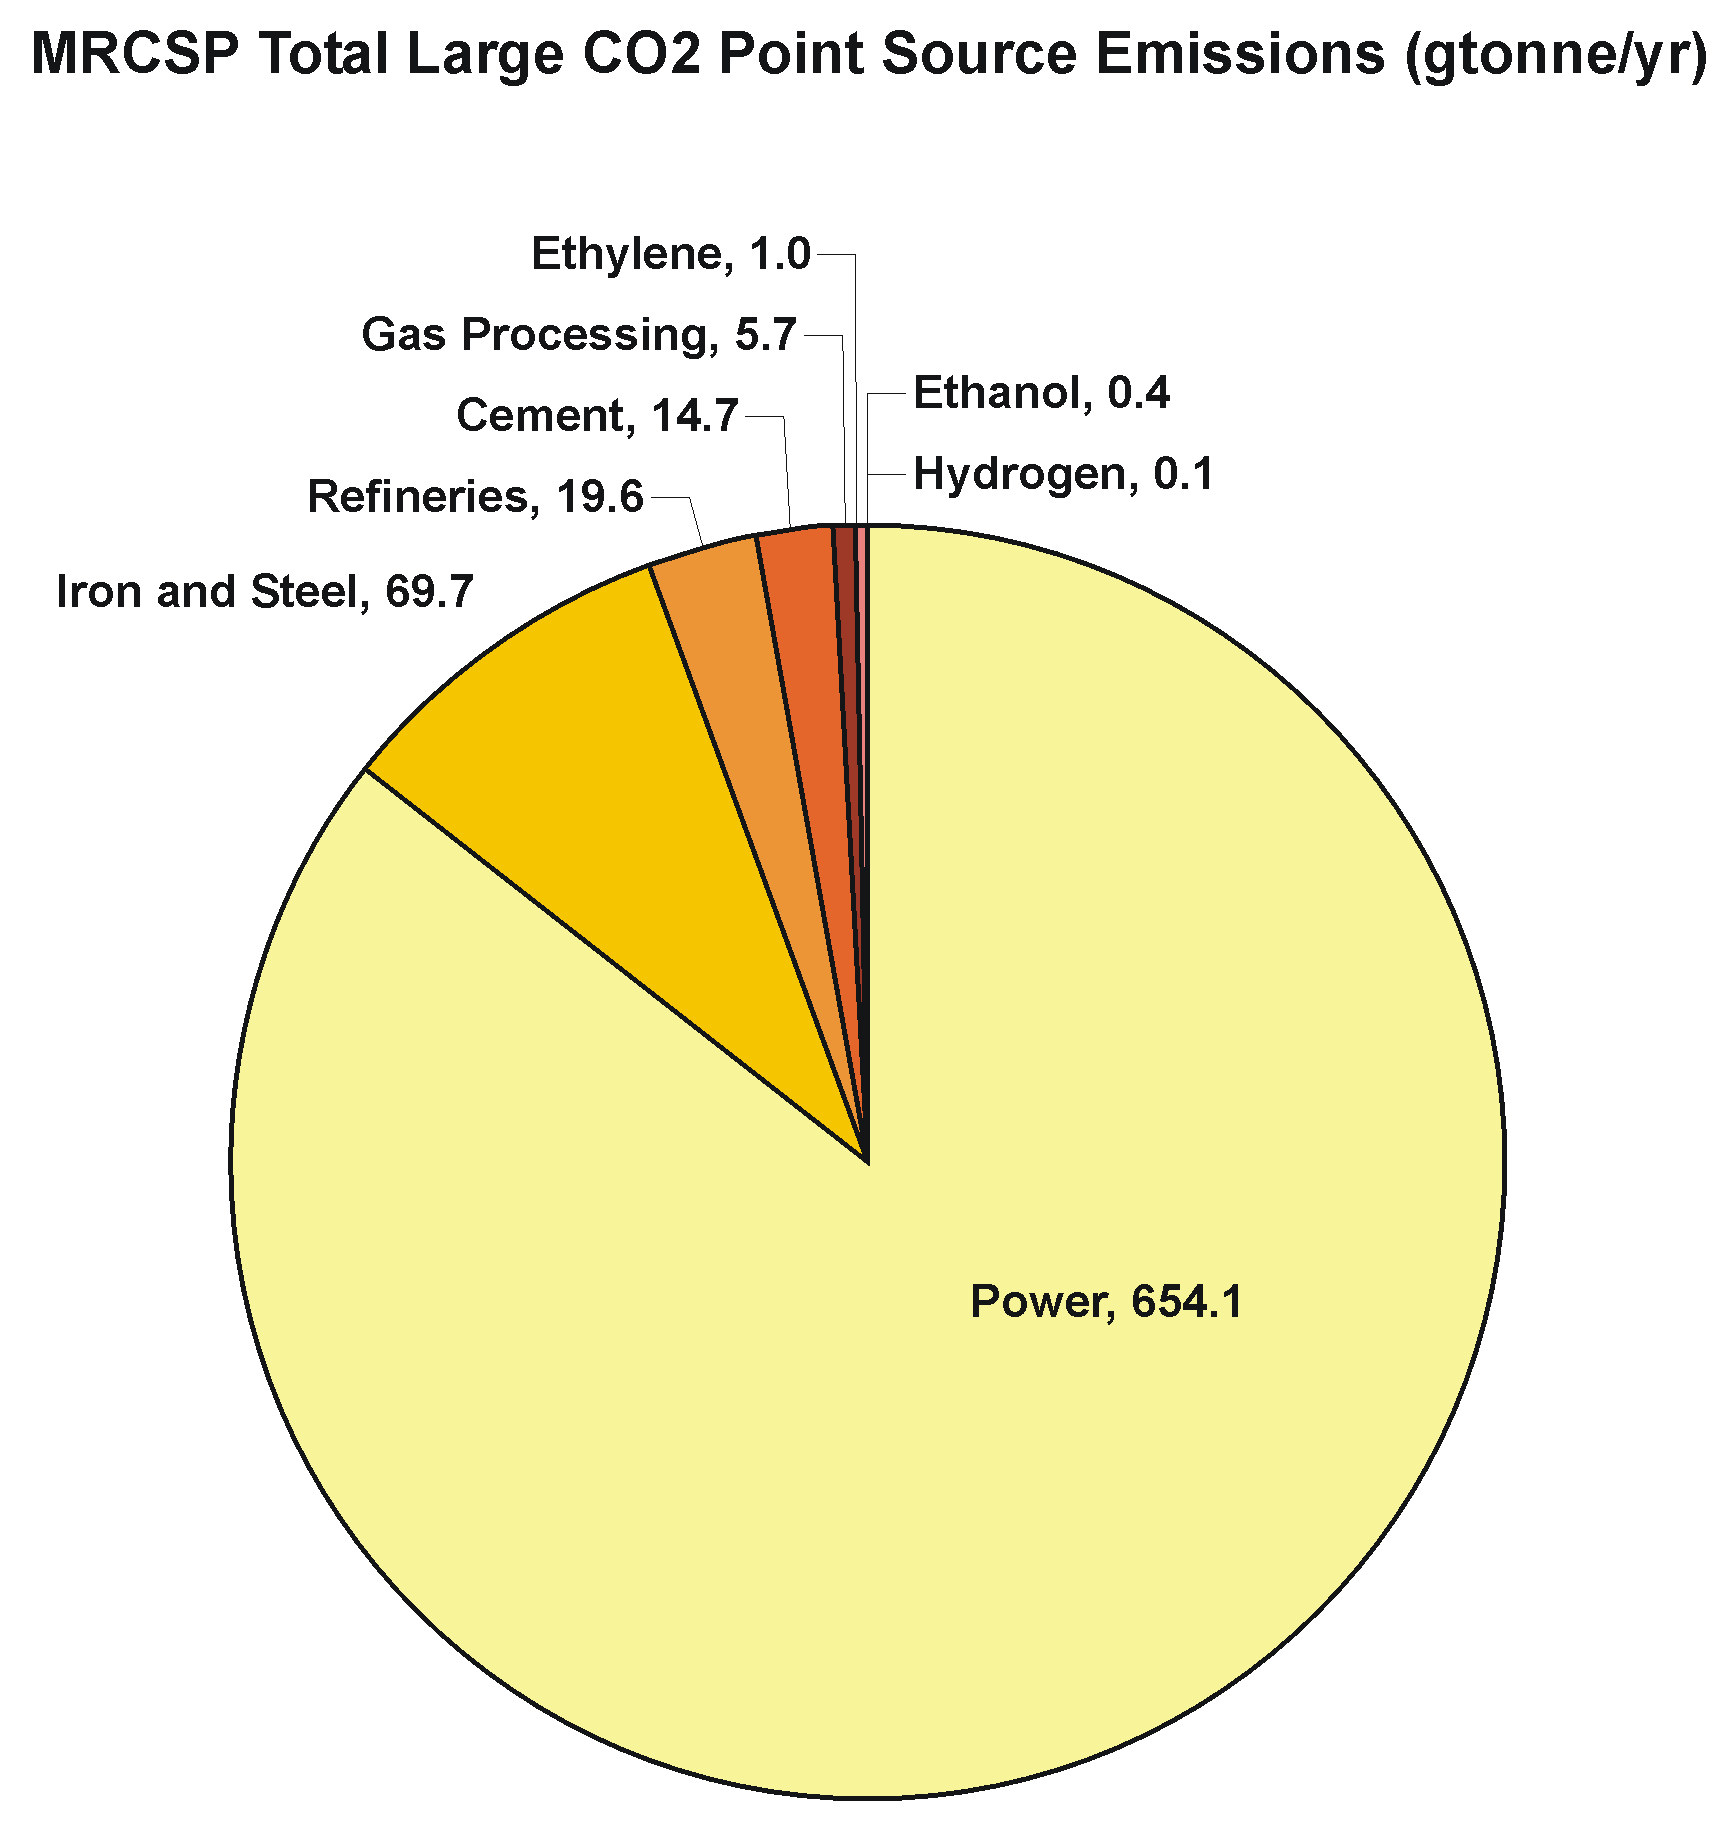 Total CO2 emitted from large point sources by source type.